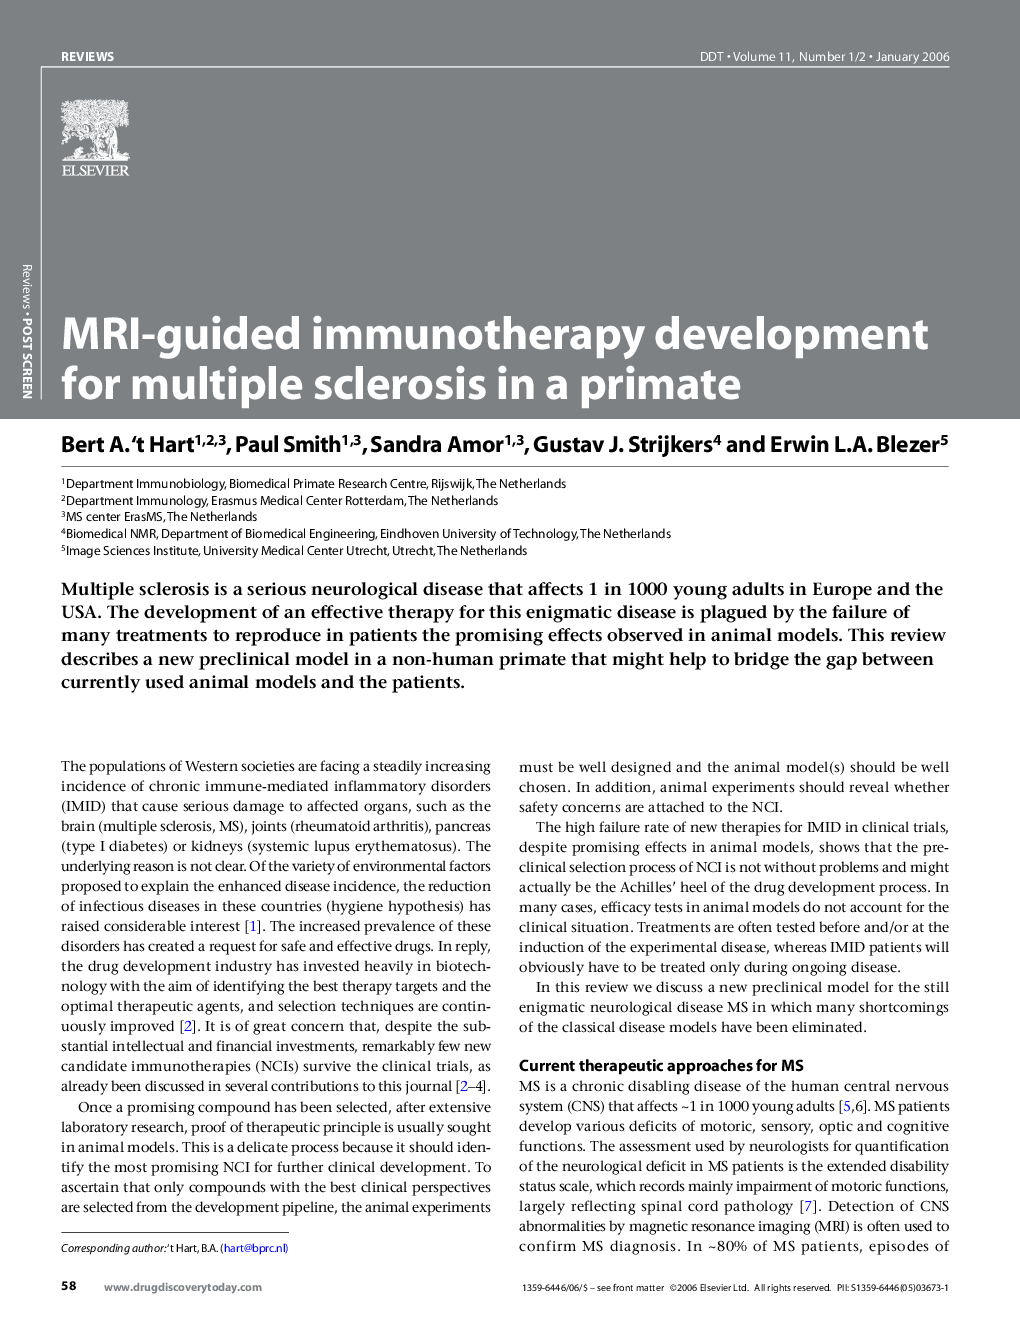 MRI-guided immunotherapy development for multiple sclerosis in a primate